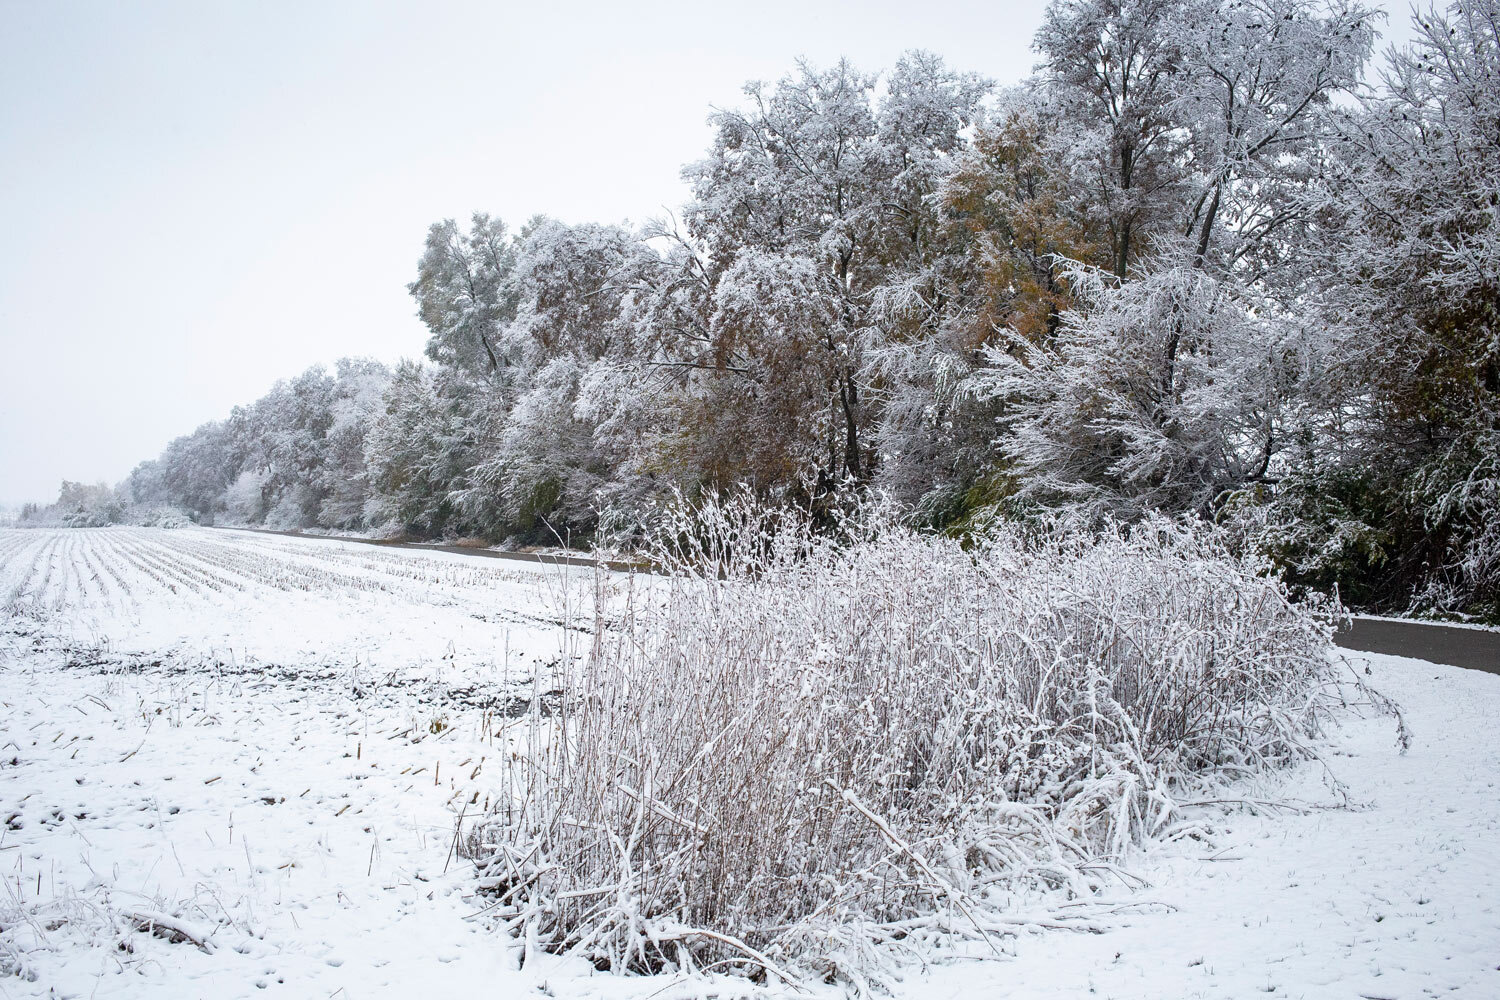  Snow covers the tree line along the Interurban Trail near Scheels Friday, Nov. 9, 2018 in Springfield, Ill. [Rich Saal/The State Journal-Register] 